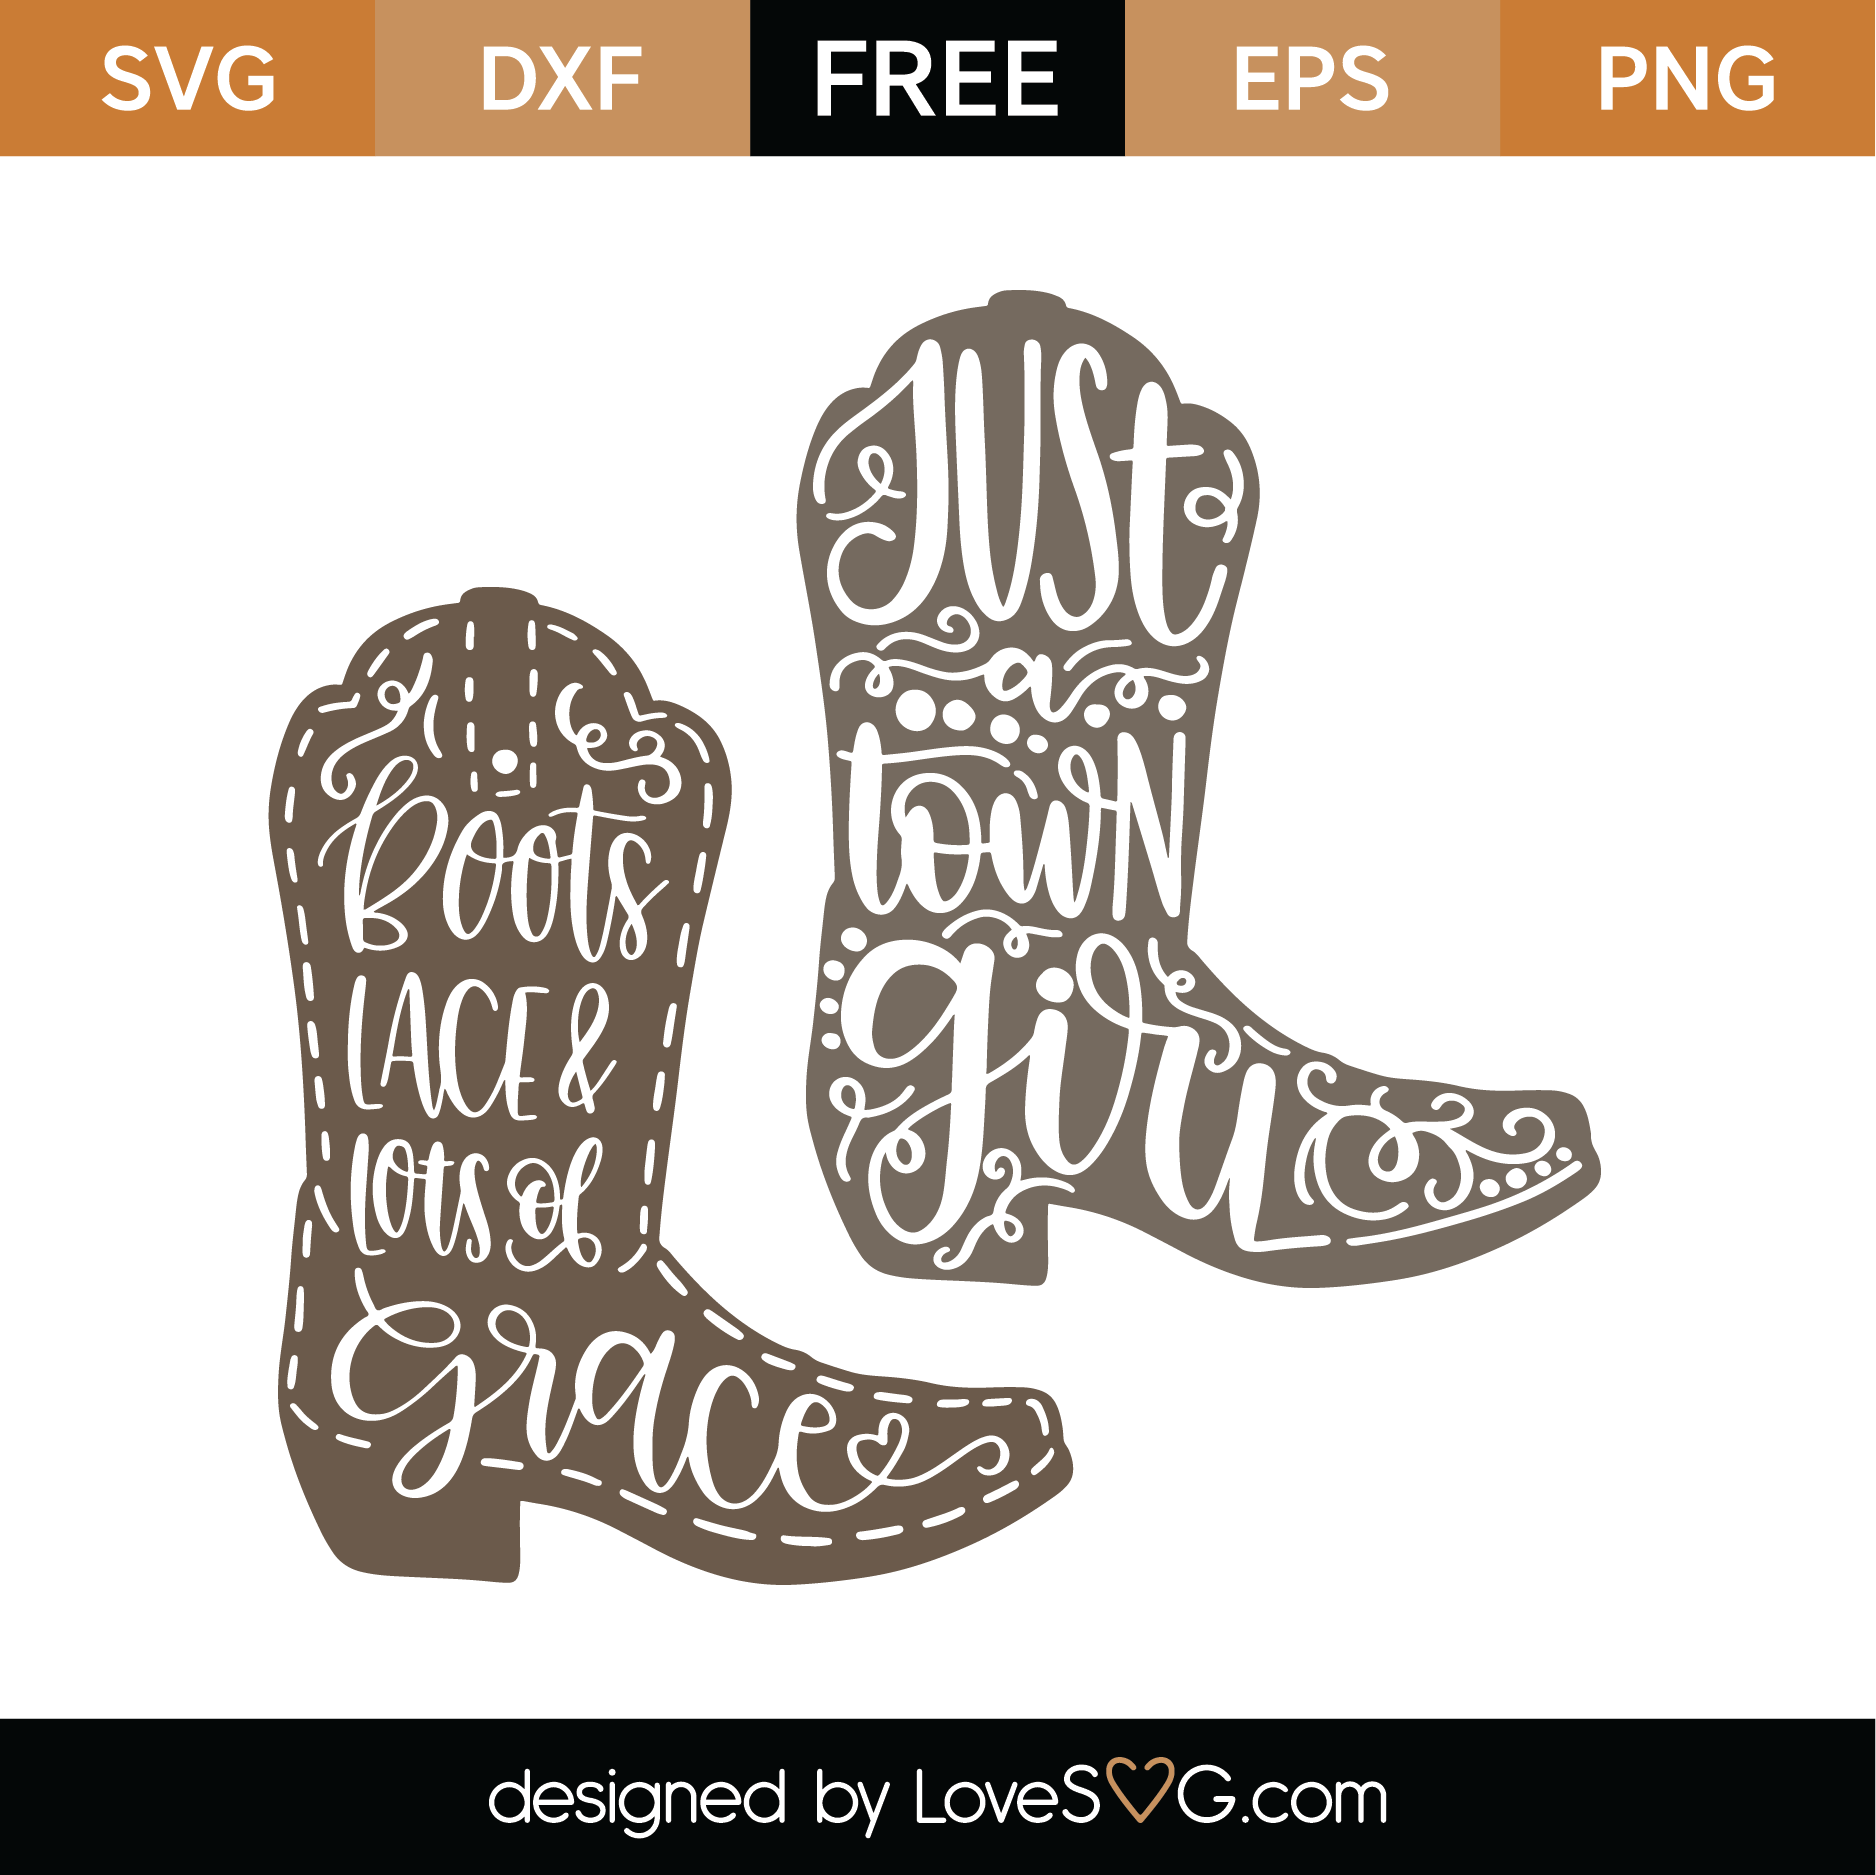 Download Free Cowboy Boots with Words SVG Cut File | Lovesvg.com